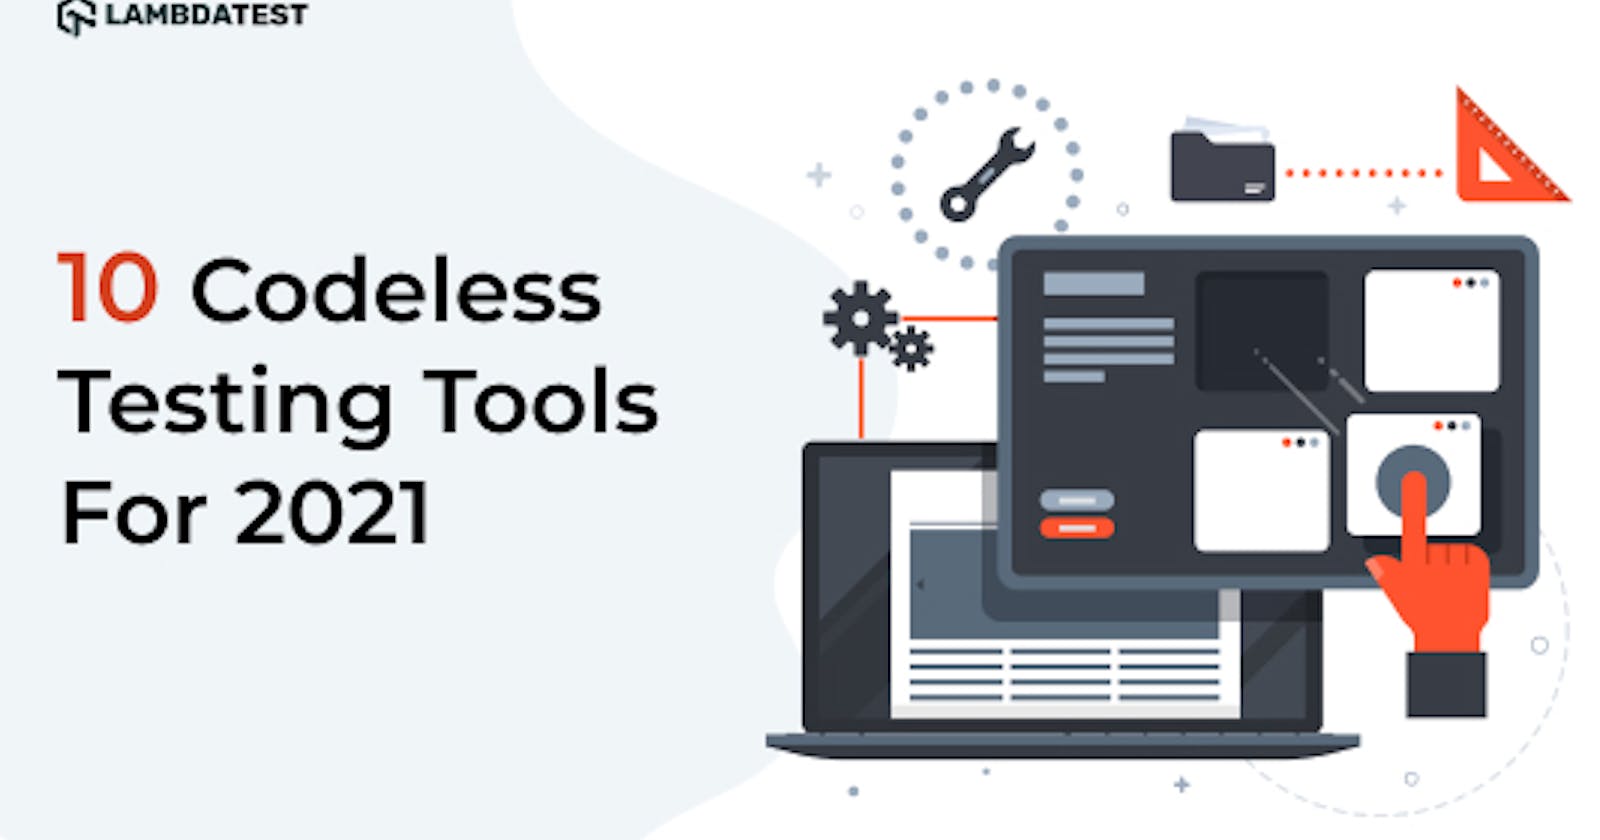 Top 10 Codeless Testing Tools For 2021